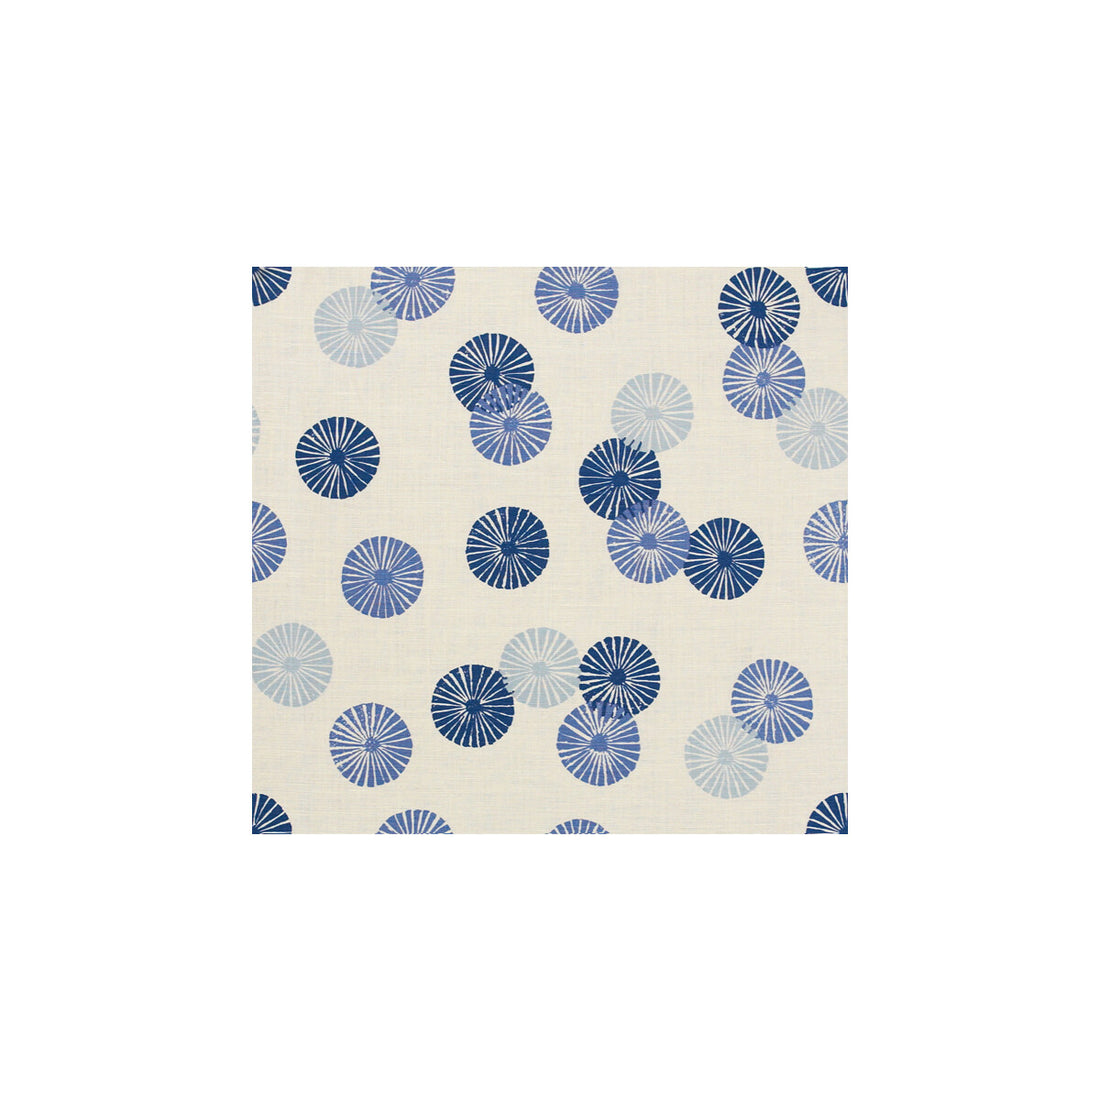 Kasa fabric in blue color - pattern GWF-3004.515.0 - by Lee Jofa Modern in the Silhouette Prints collection